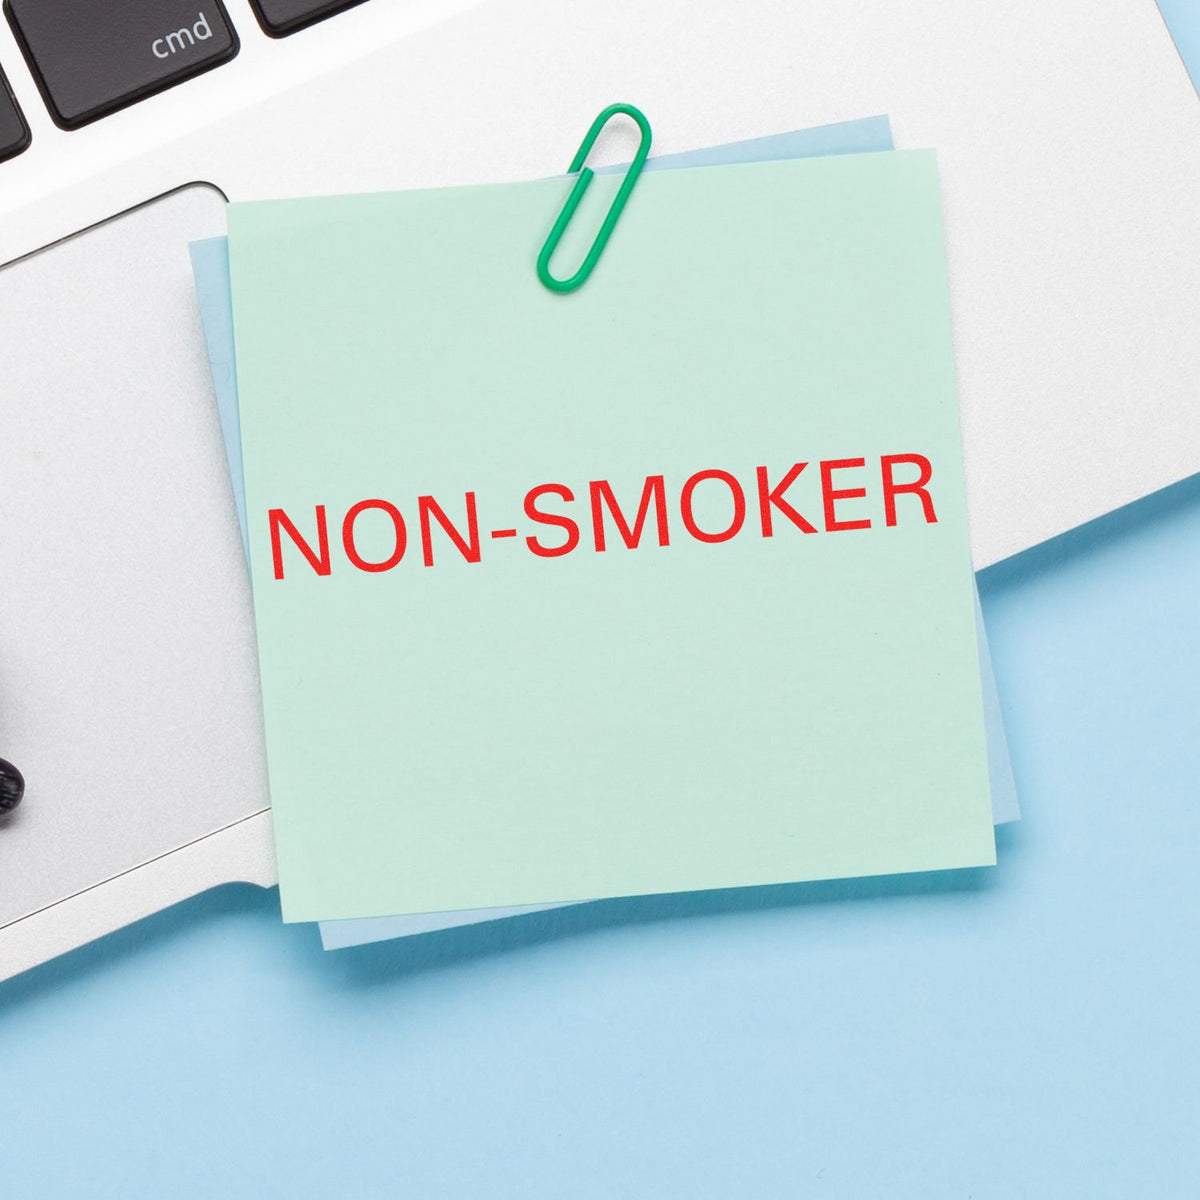 Non-Smoker Rubber Stamp In Use Photo